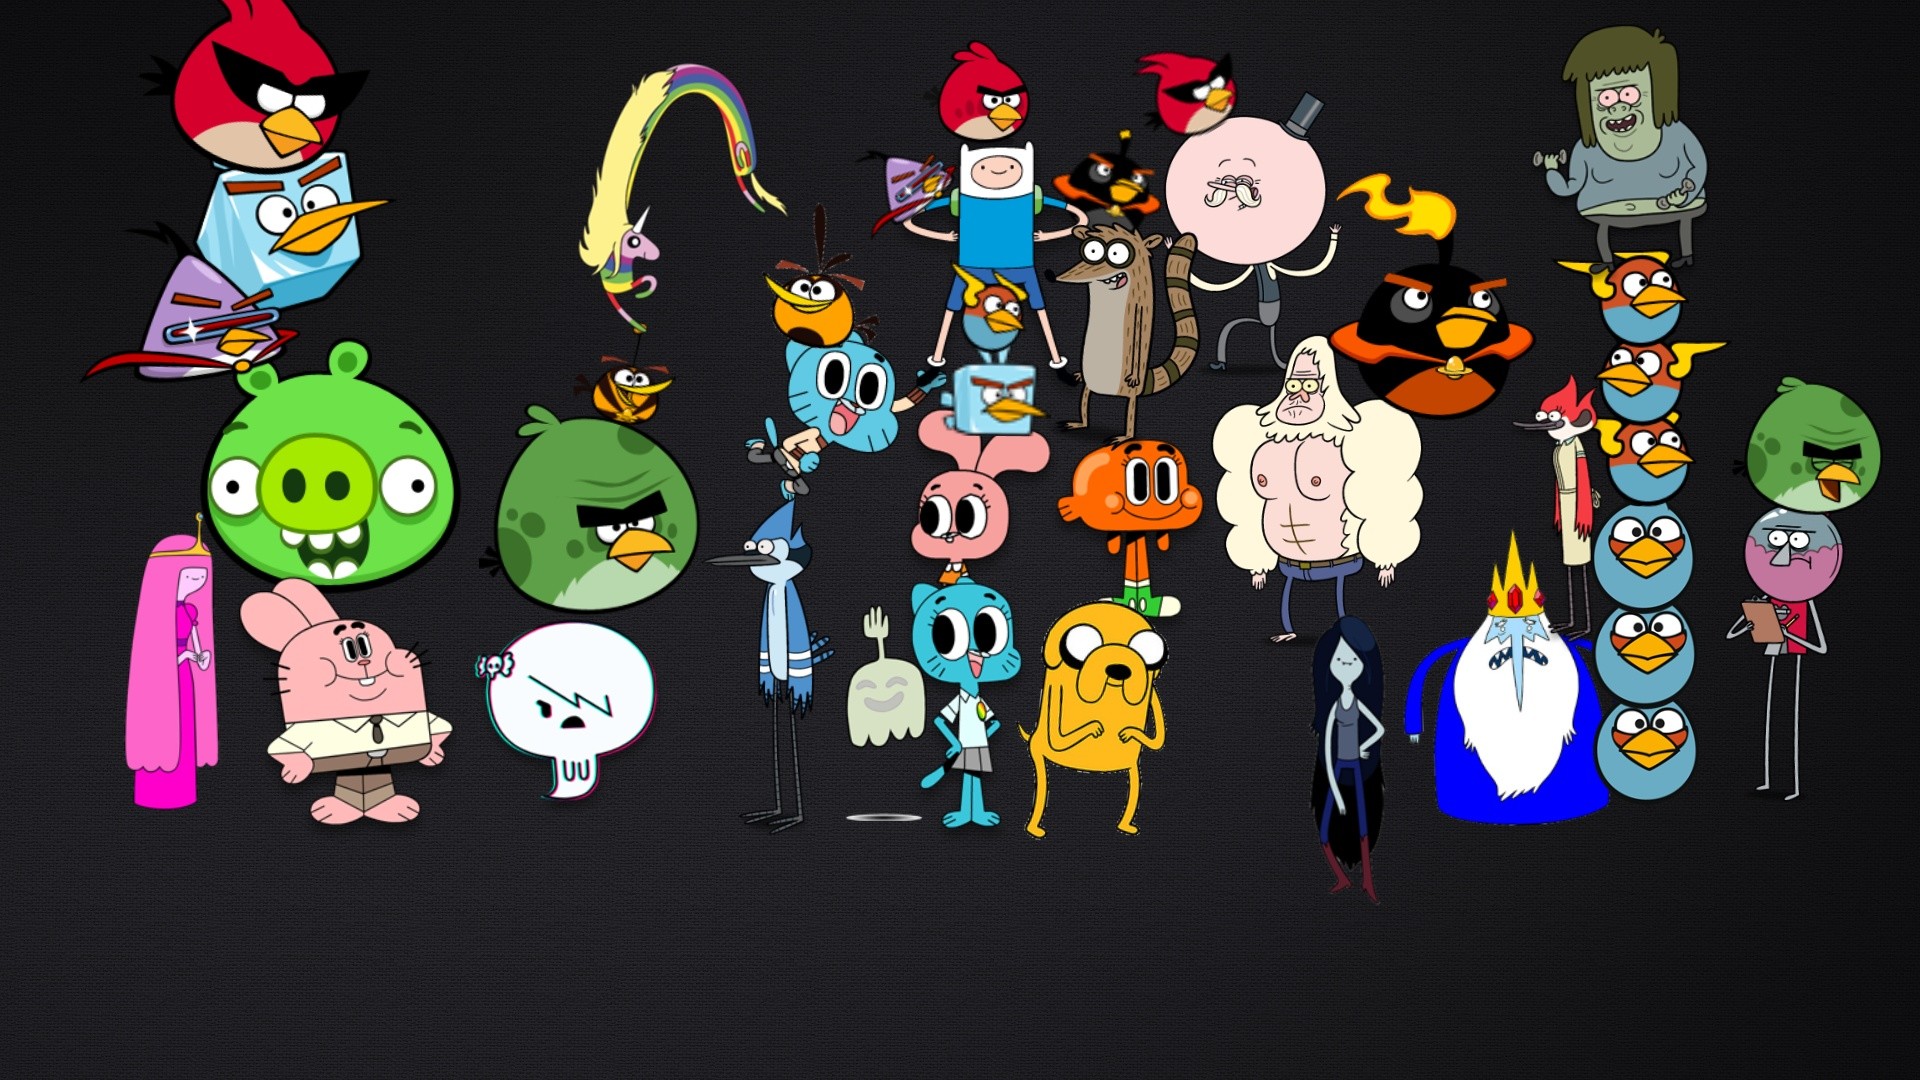 1920x1080 User blog:Tyrex56/My new Angry Birds, Adventure time, Regular show, and The  amazing world of Gumball pictures | Angry Birds Wiki | FANDOM powered by  Wikia